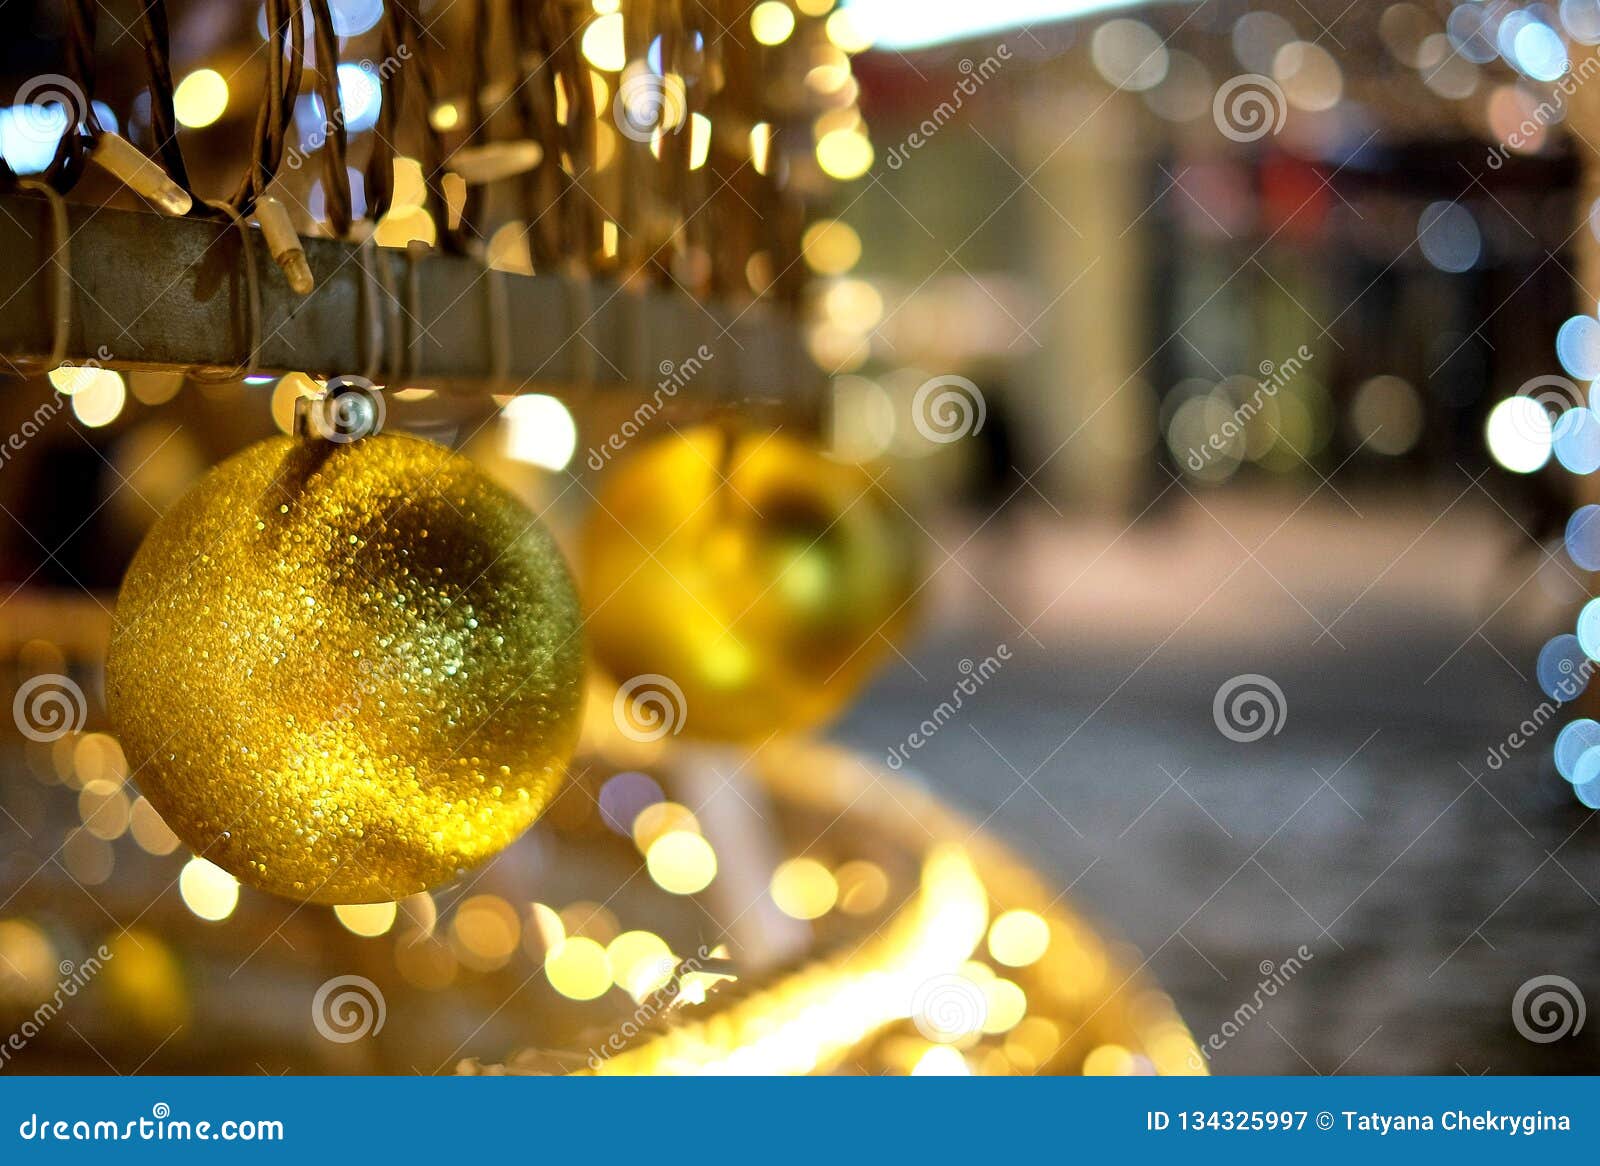 Christmas Decoration Background with Golden Lights Glowing Stock Image ...